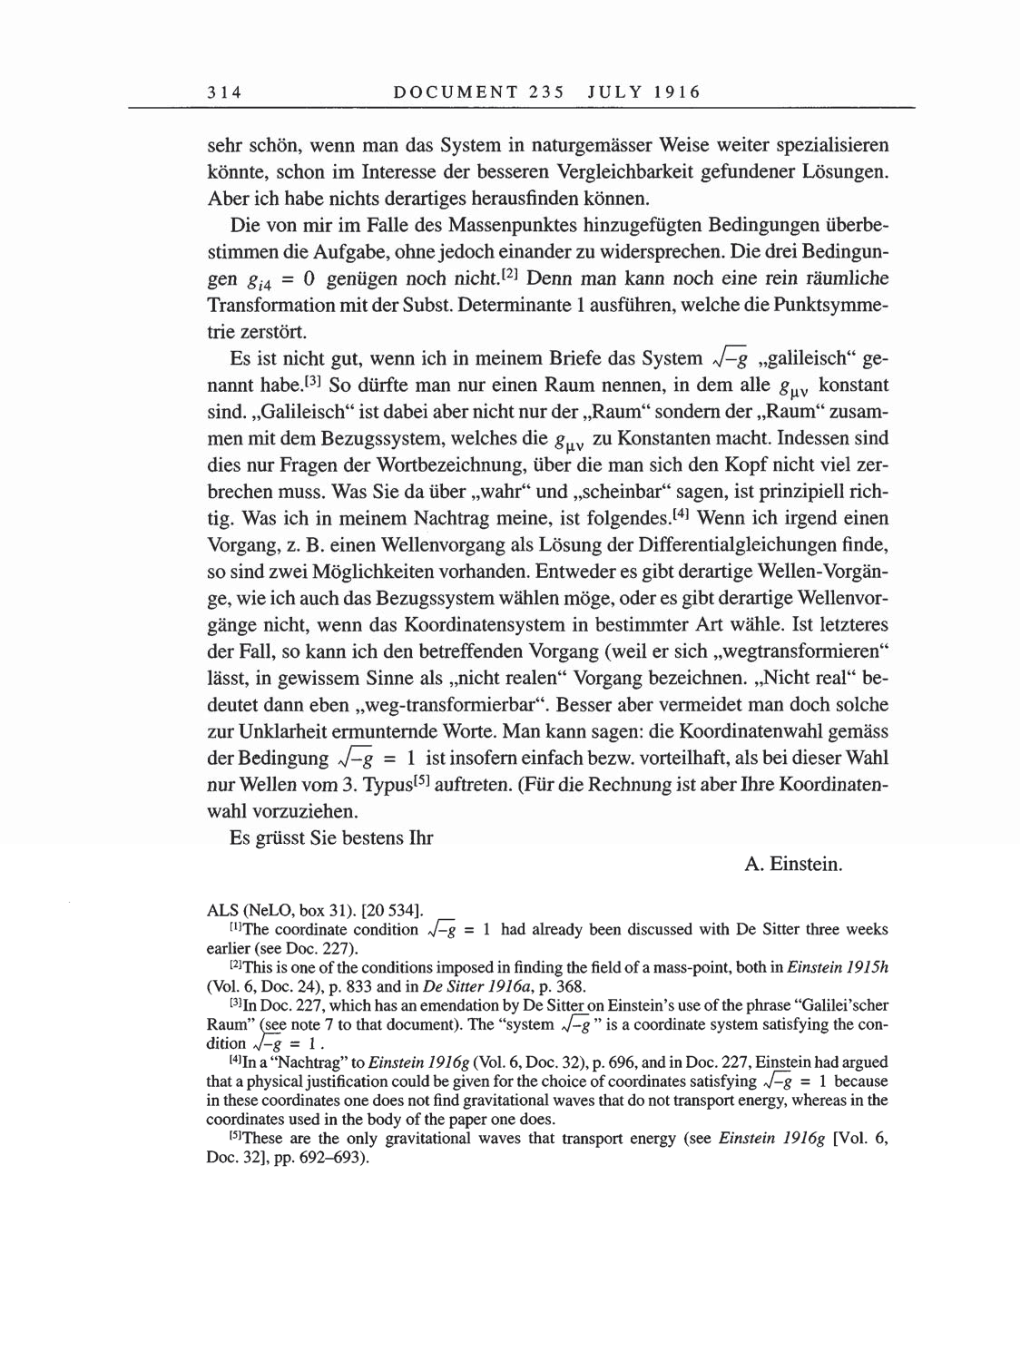 Volume 8, Part A: The Berlin Years: Correspondence 1914-1917 page 314